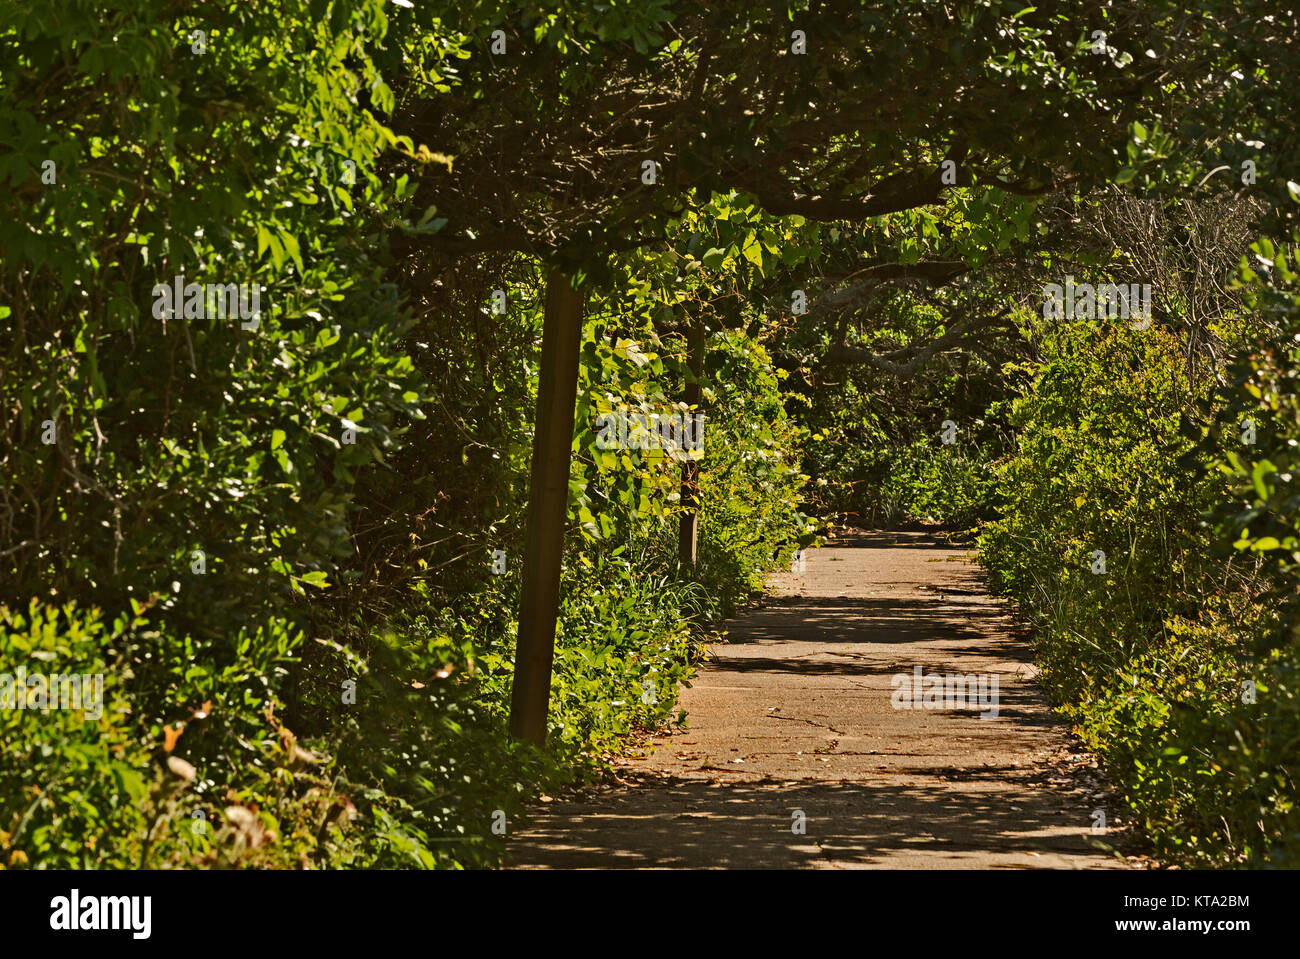 NC01156-00...NORTH CAROLINA - Trail at the Pea Island National Wildlife Refuge located on the Outer Banks. Stock Photo